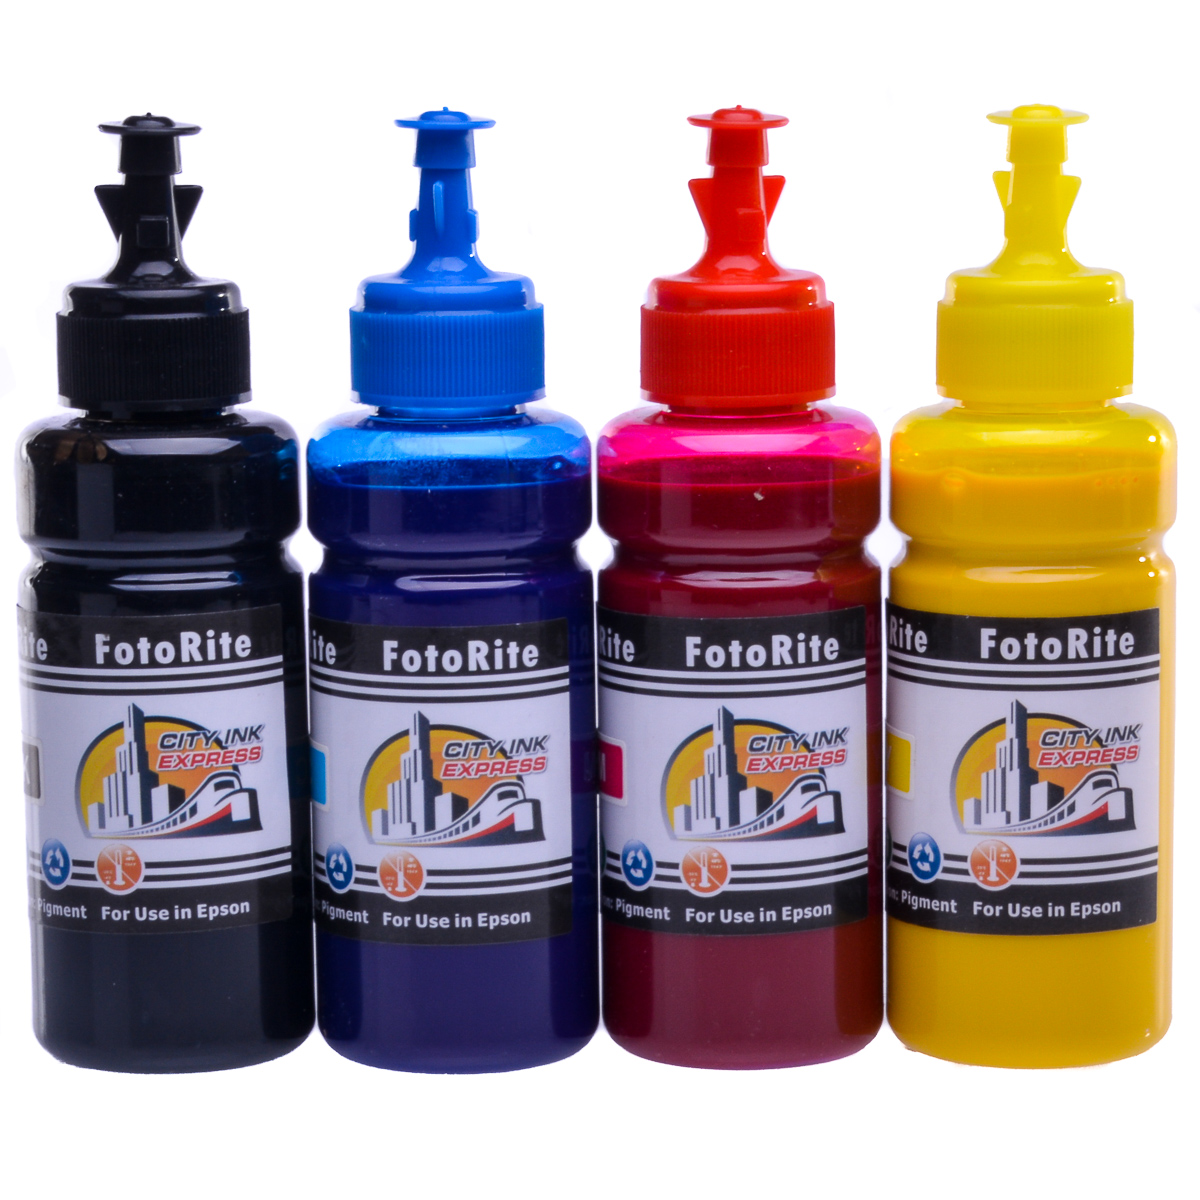 Cheap Multipack pigment ink refill replaces Epson XP-4105